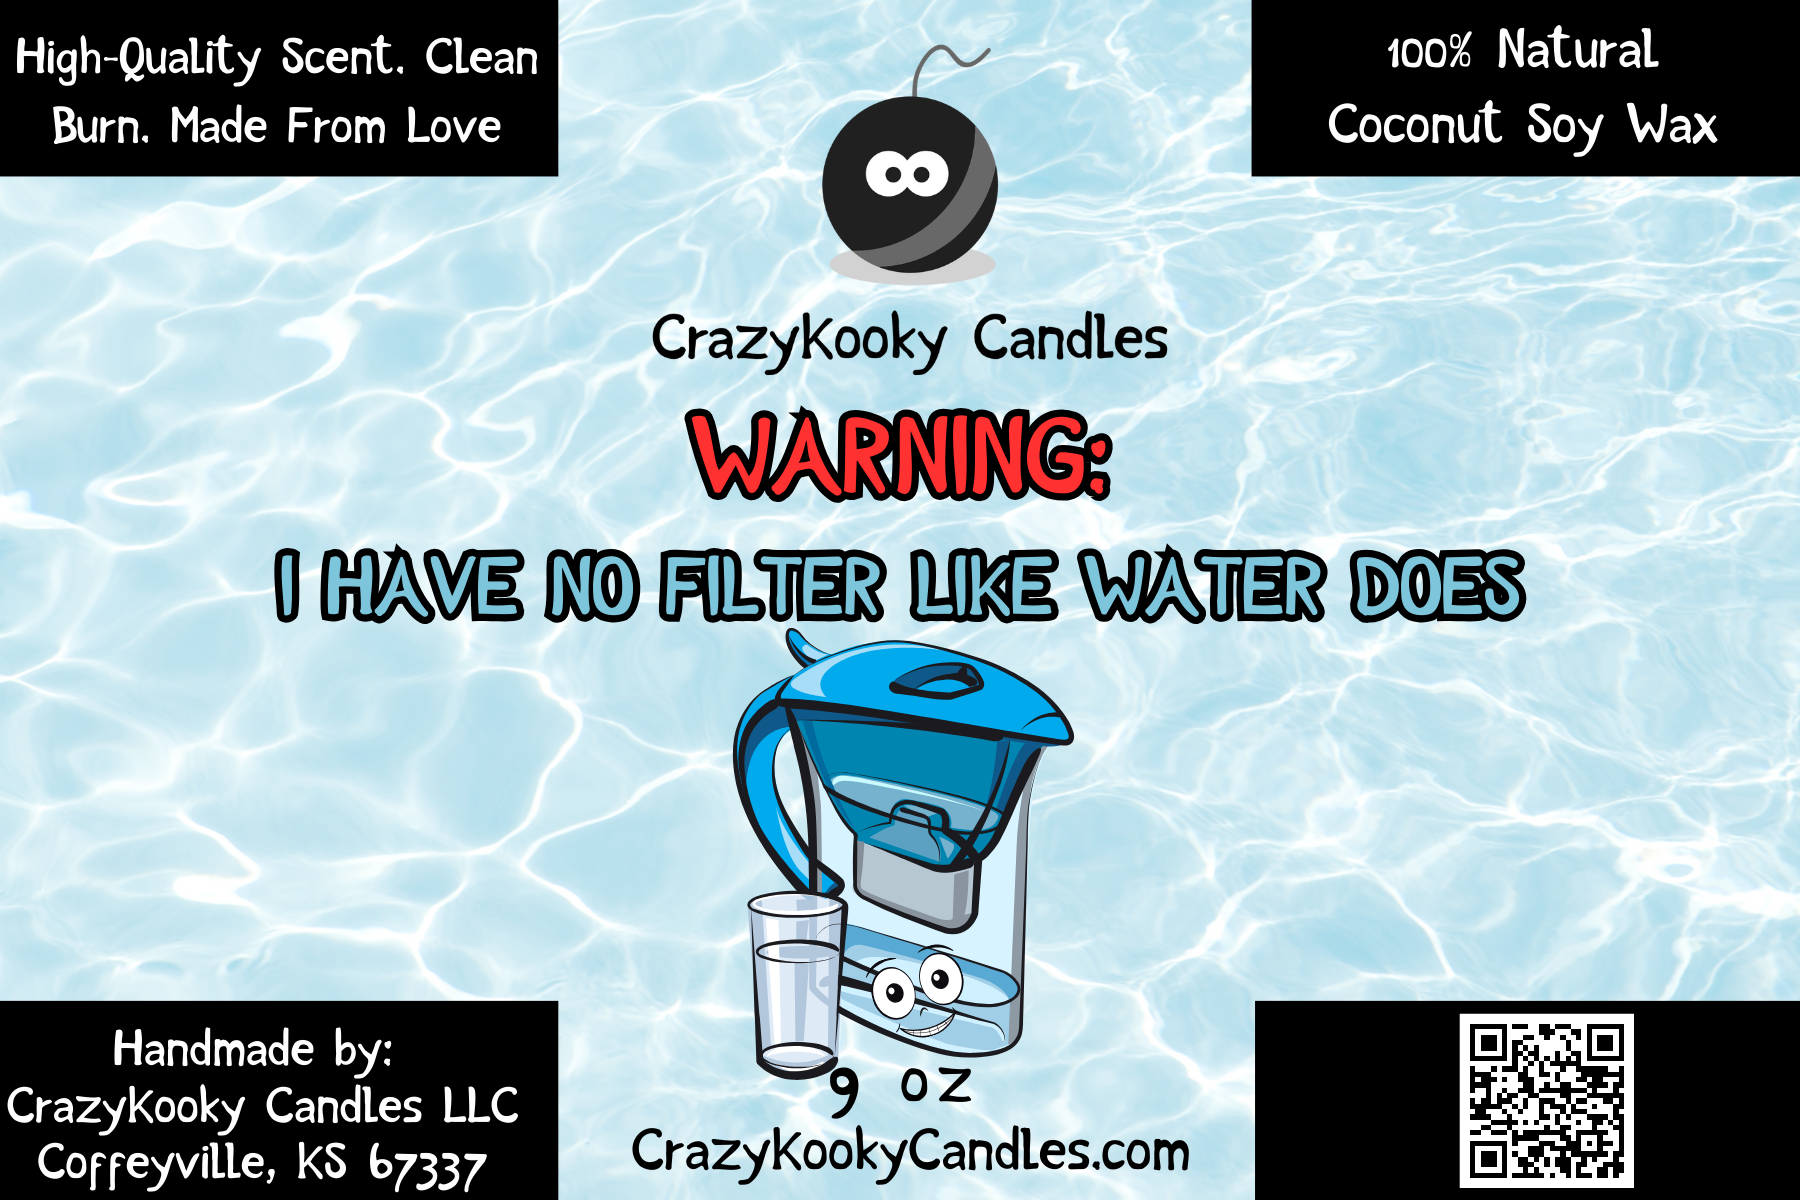 WARNING: I HAVE NO FILTER LIKE WATER DOES - Funny Candle, Scented Coconut Soy Candle, 9oz - CrazyKooky Candles LLC